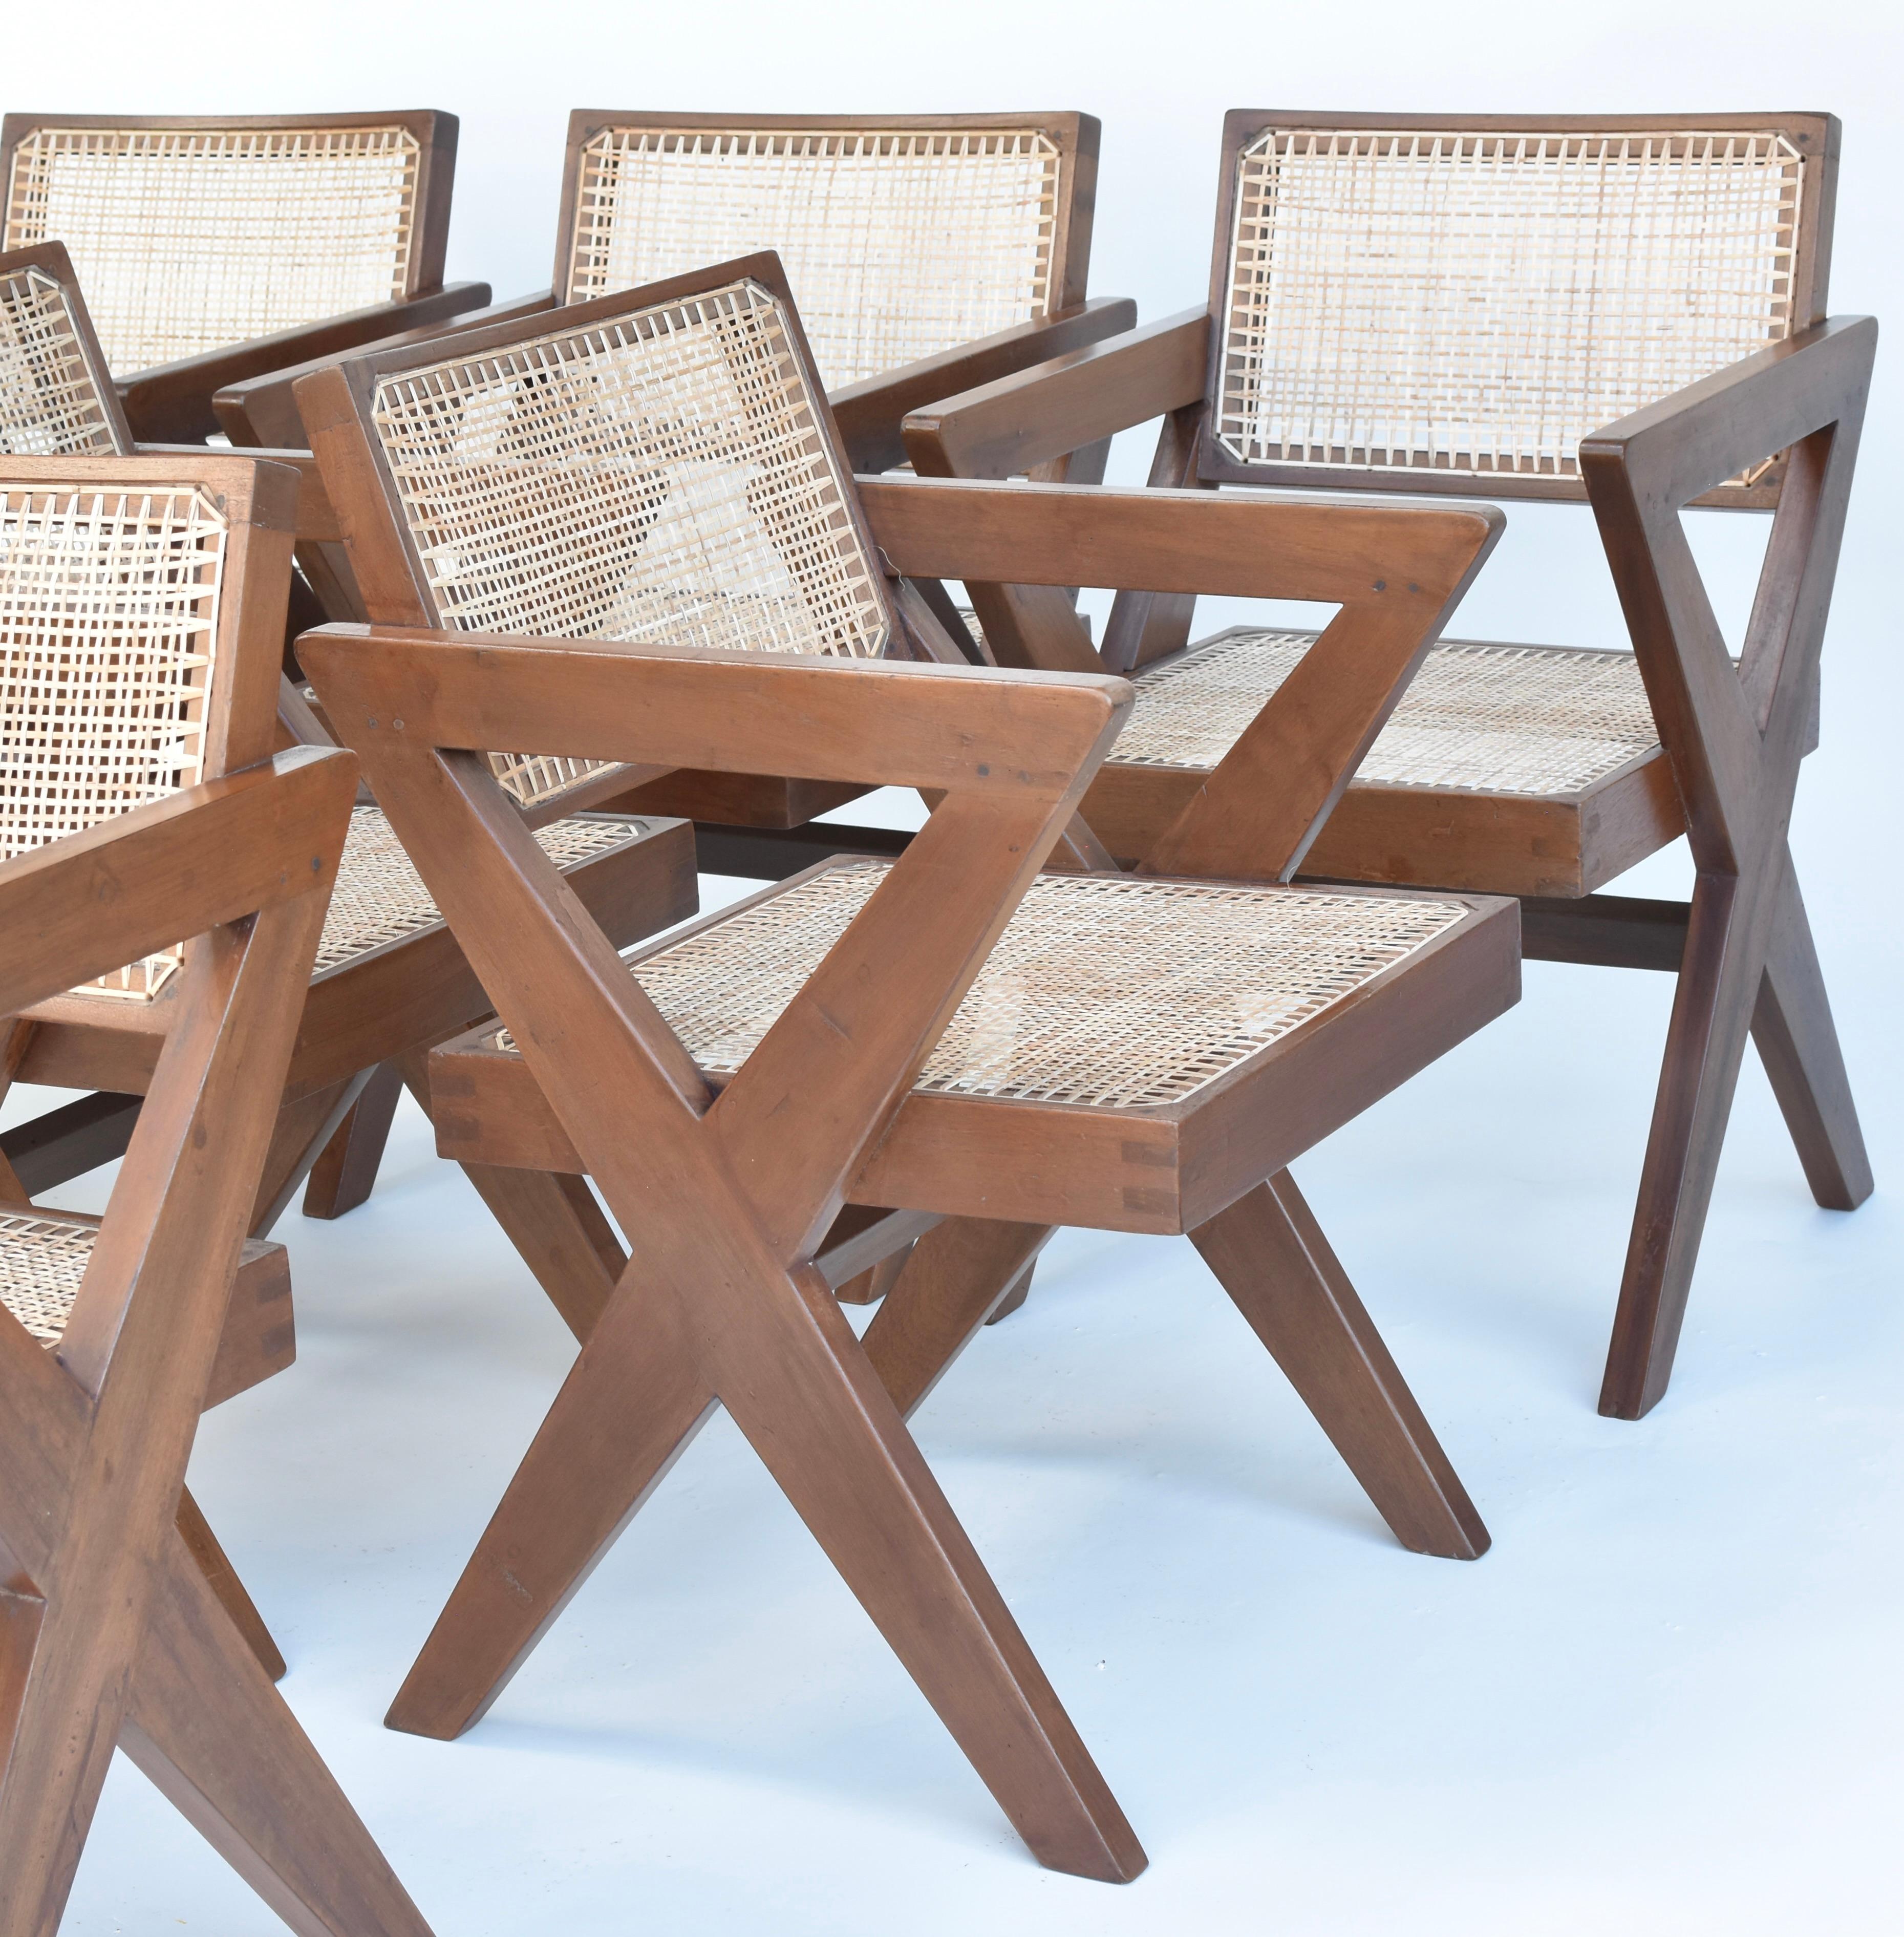 Pierre Jeanneret Set of 8 X-Leg Office Chairs Circa 1960s, Chandigarh For Sale 11